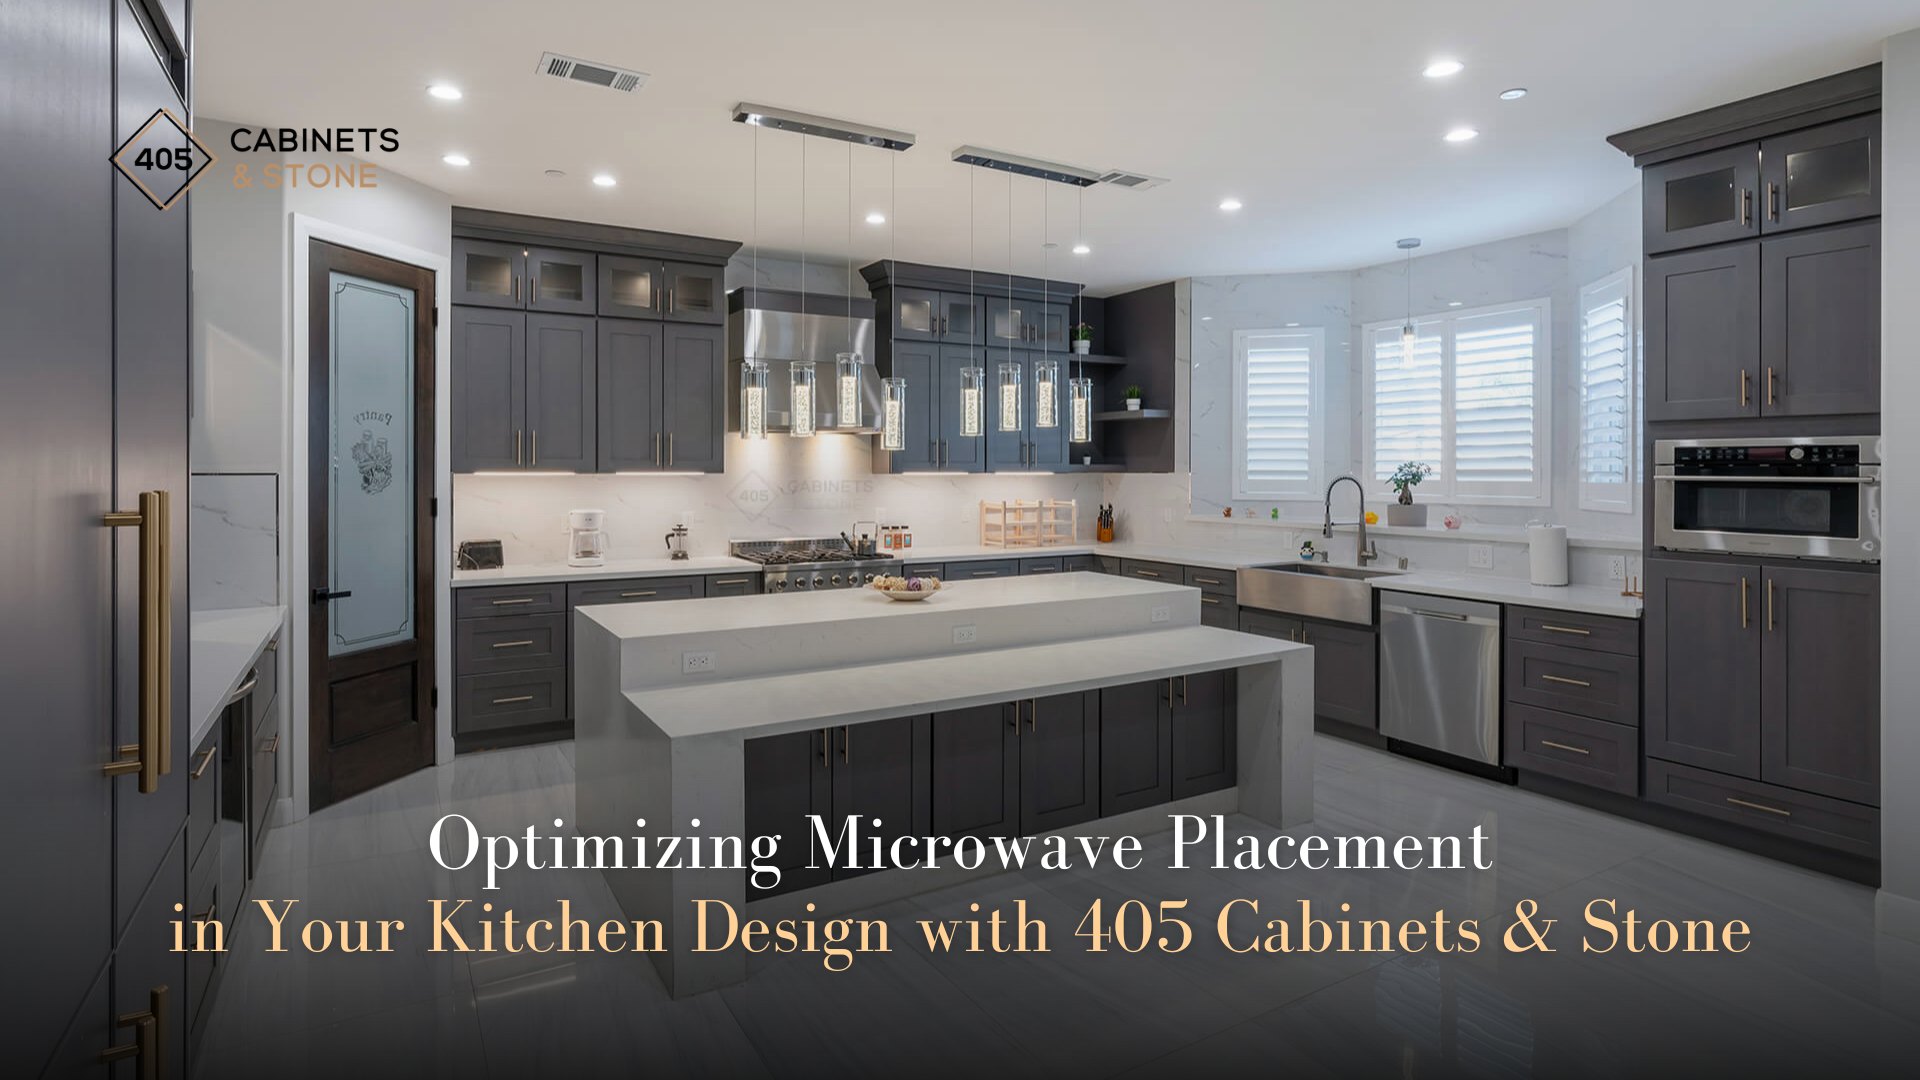 Optimizing Microwave Placement in Your Kitchen Design with 405 Cabinets & Stone